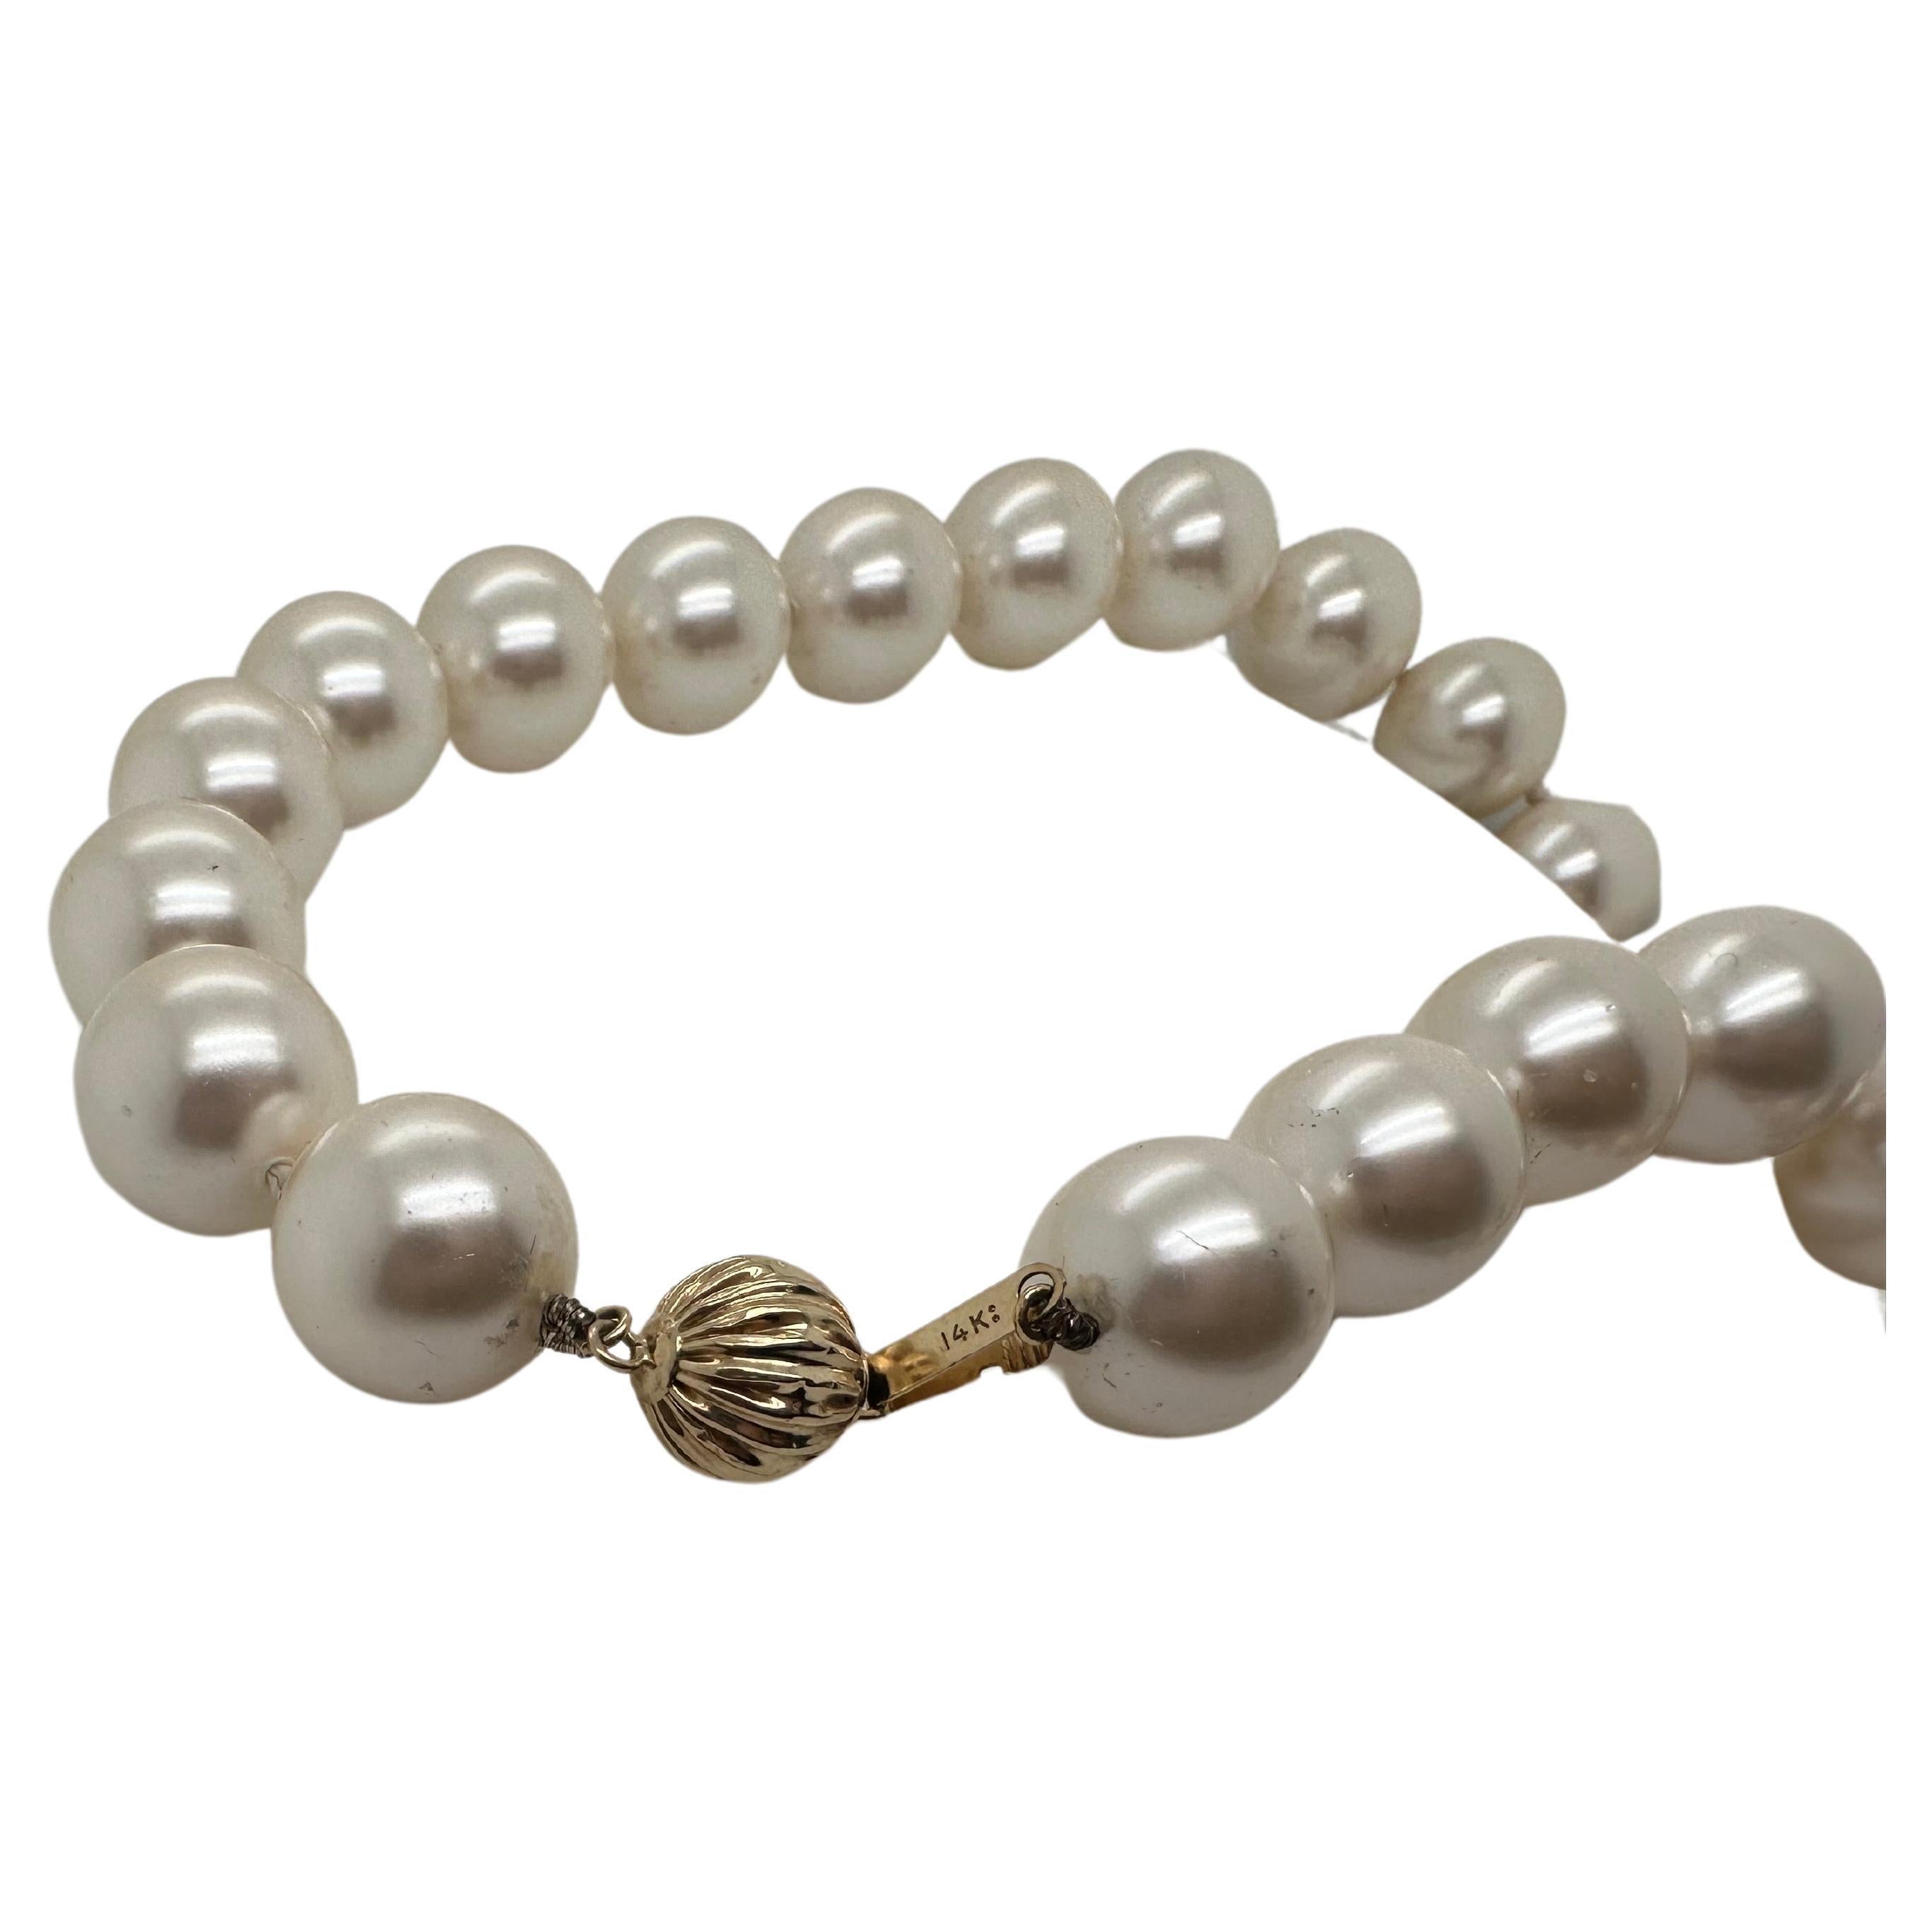 Shell pearl necklace 14KT yellow gold clasp 18" 14mm pearls For Sale